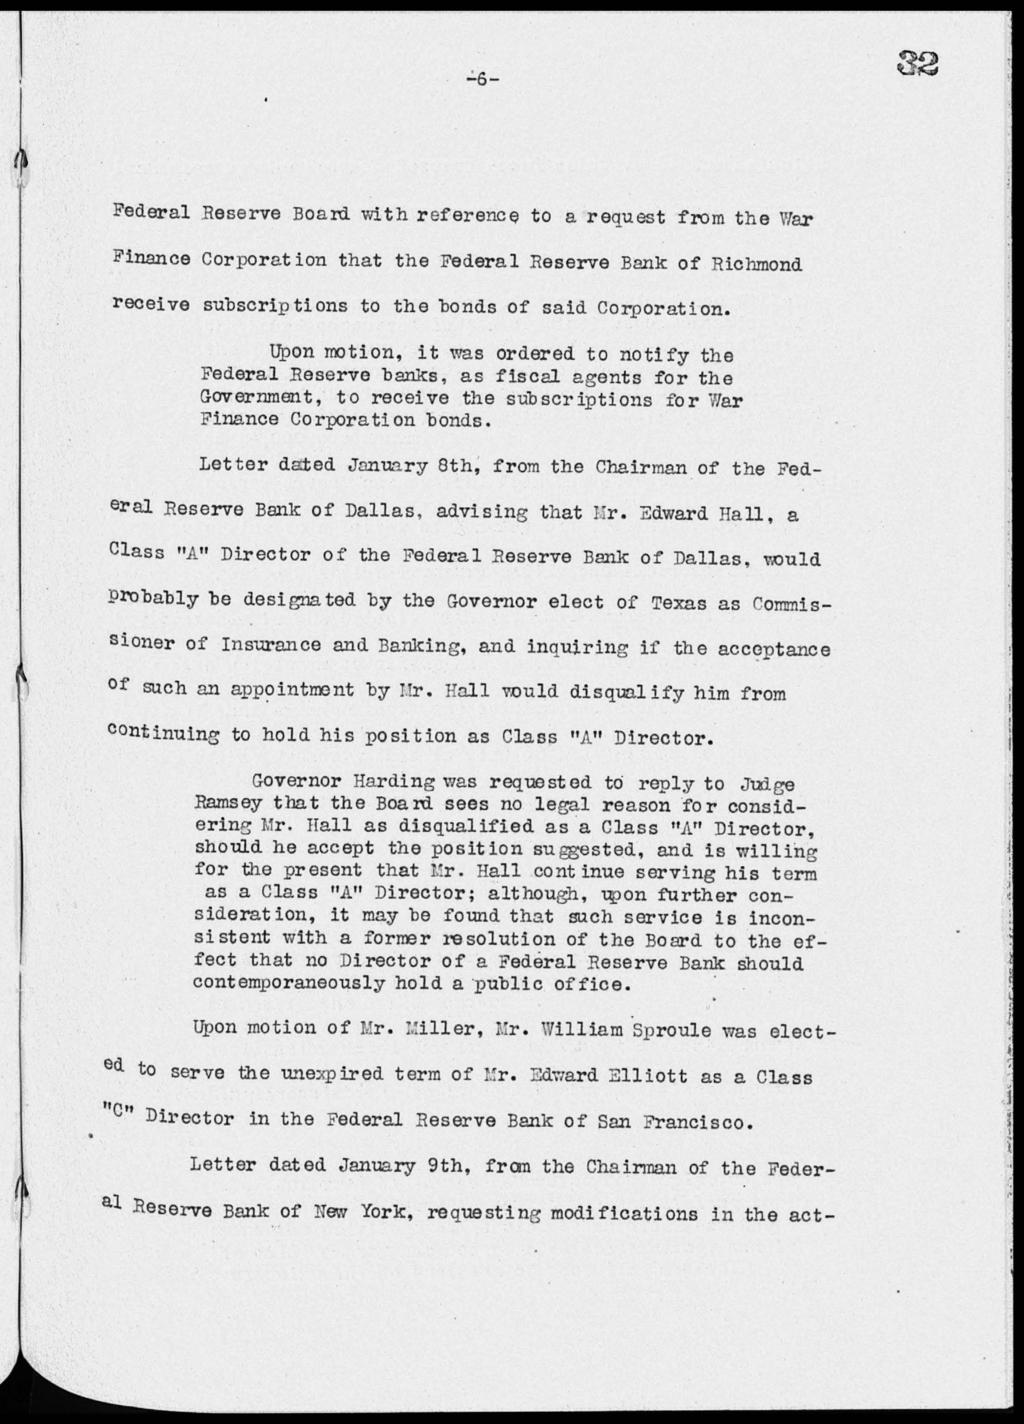 Federal Reserve Board with reference to a request from the War Finance Corporation that the Federal Reserve Bank of Richmond receive subscriptions to the bonds of said Corporation.